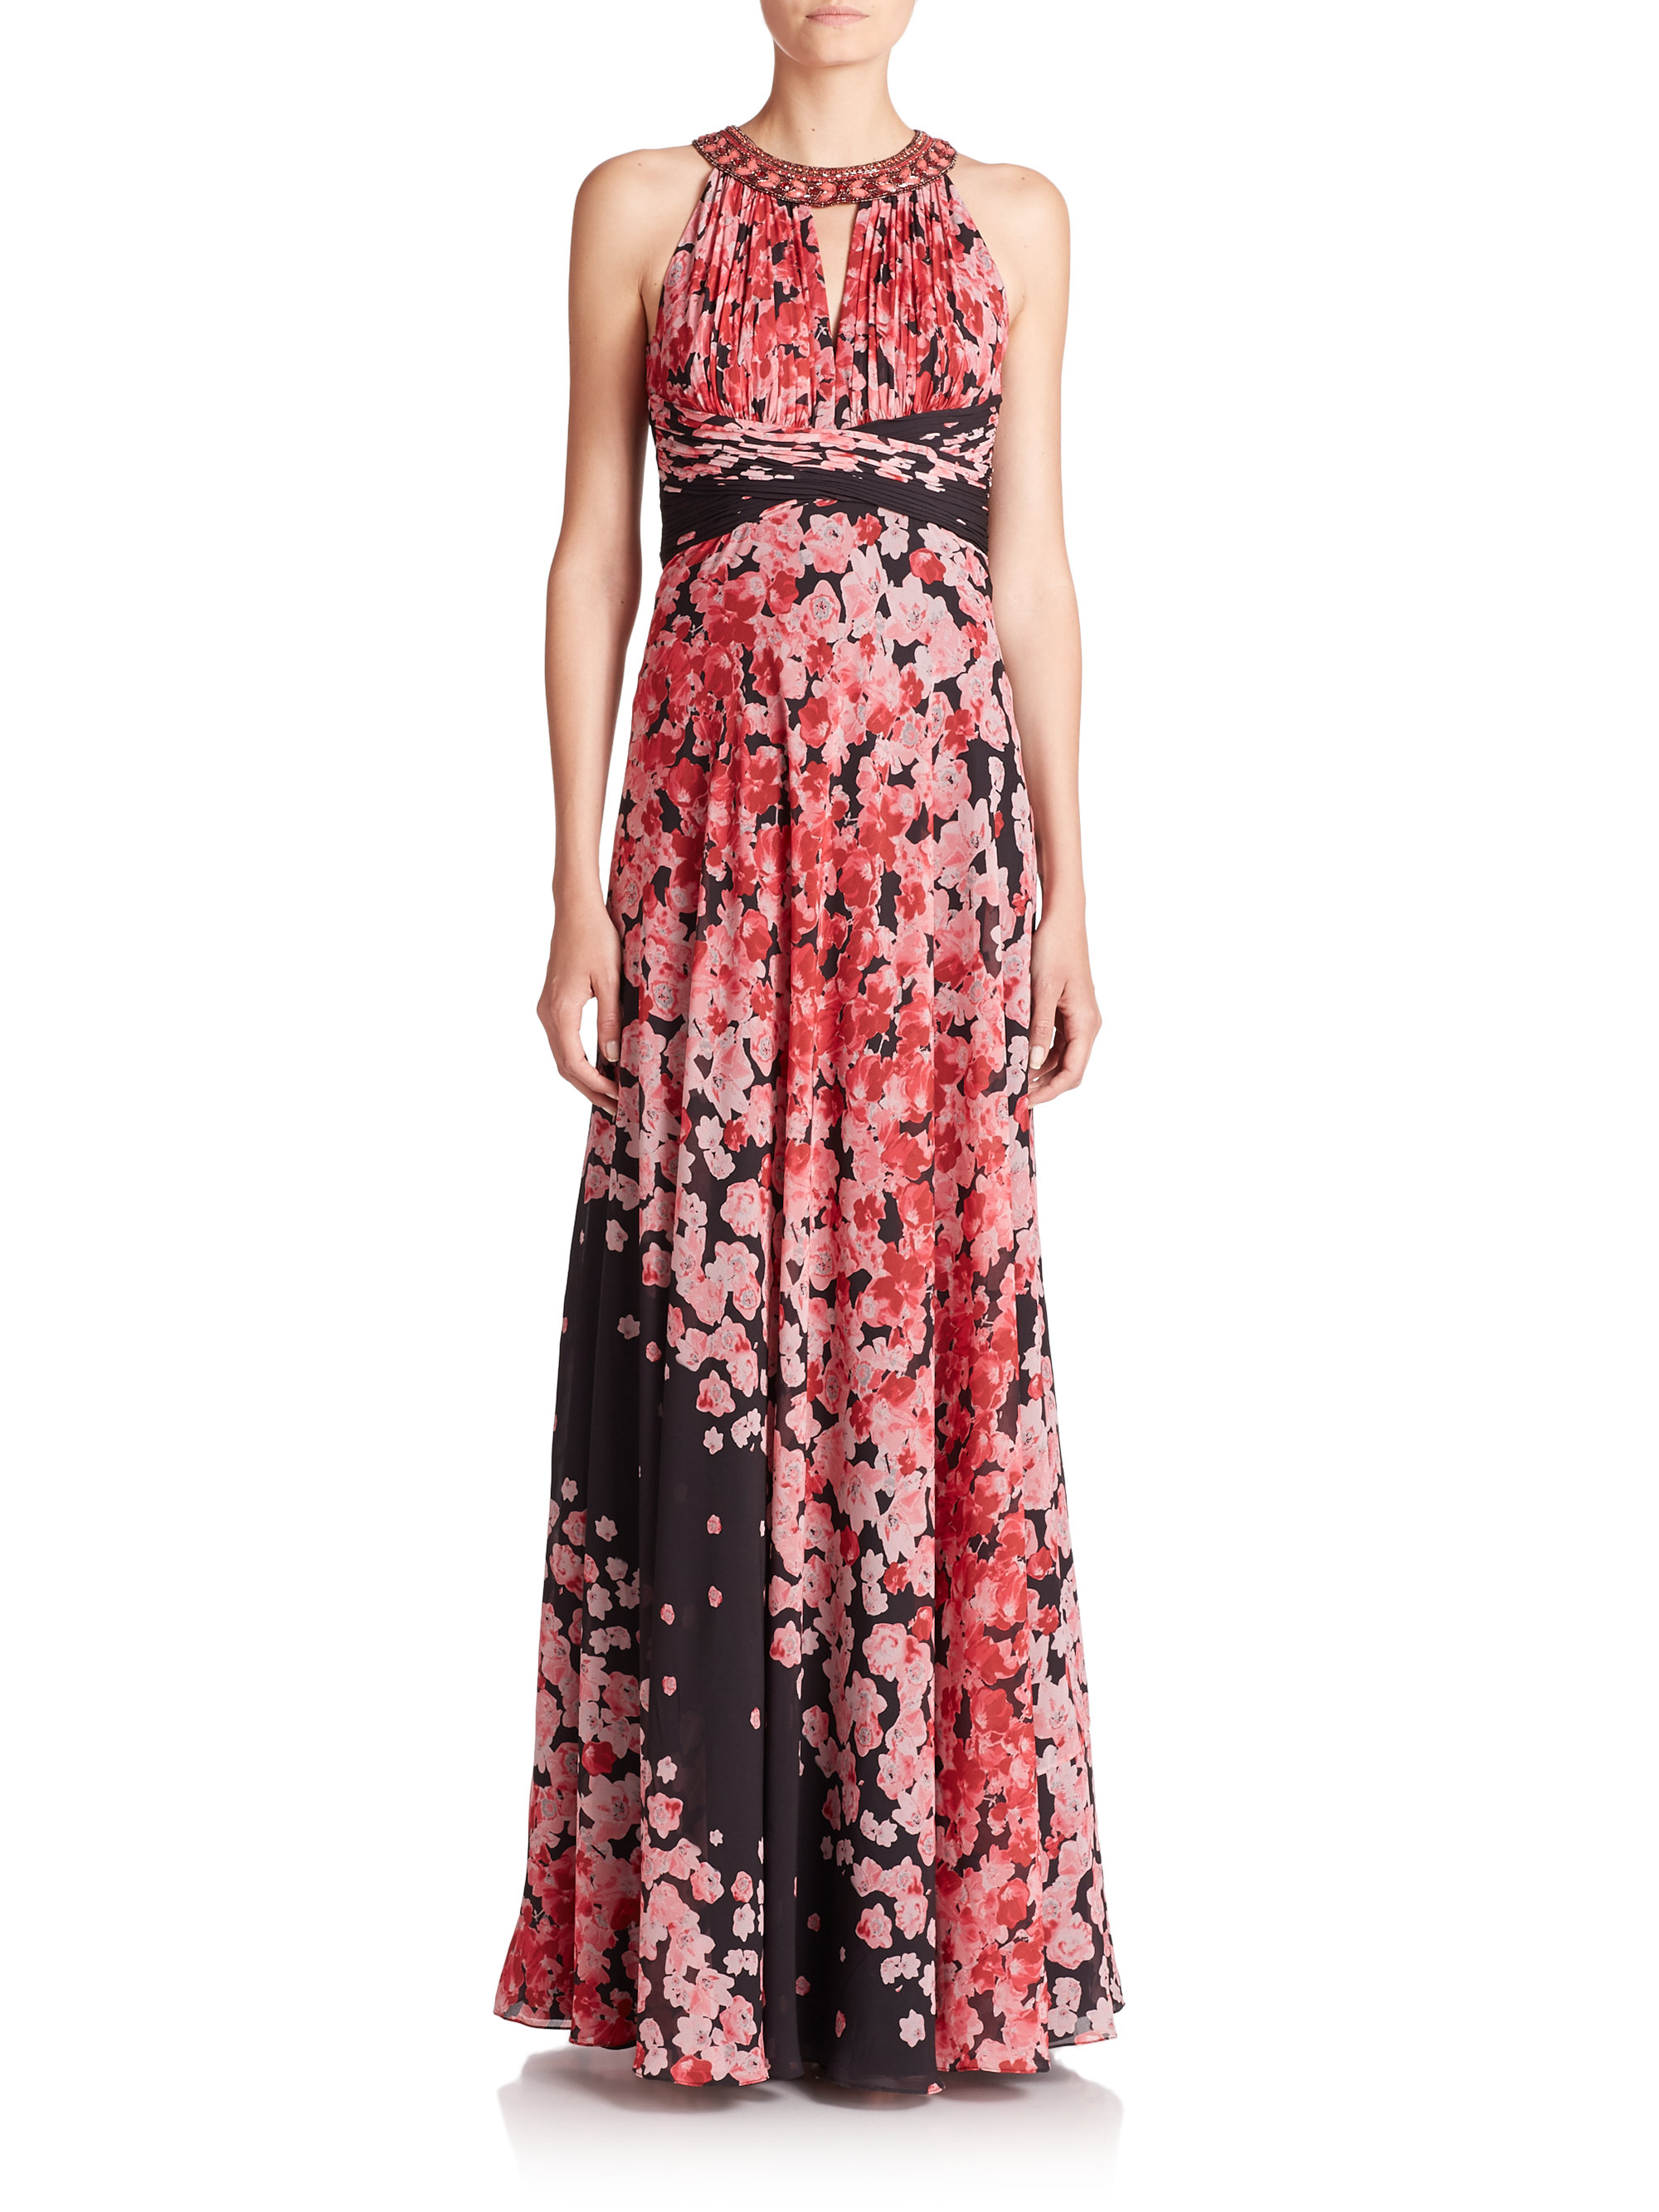 Lyst - Teri Jon Floral Empire Maxi Evening Gown in Red